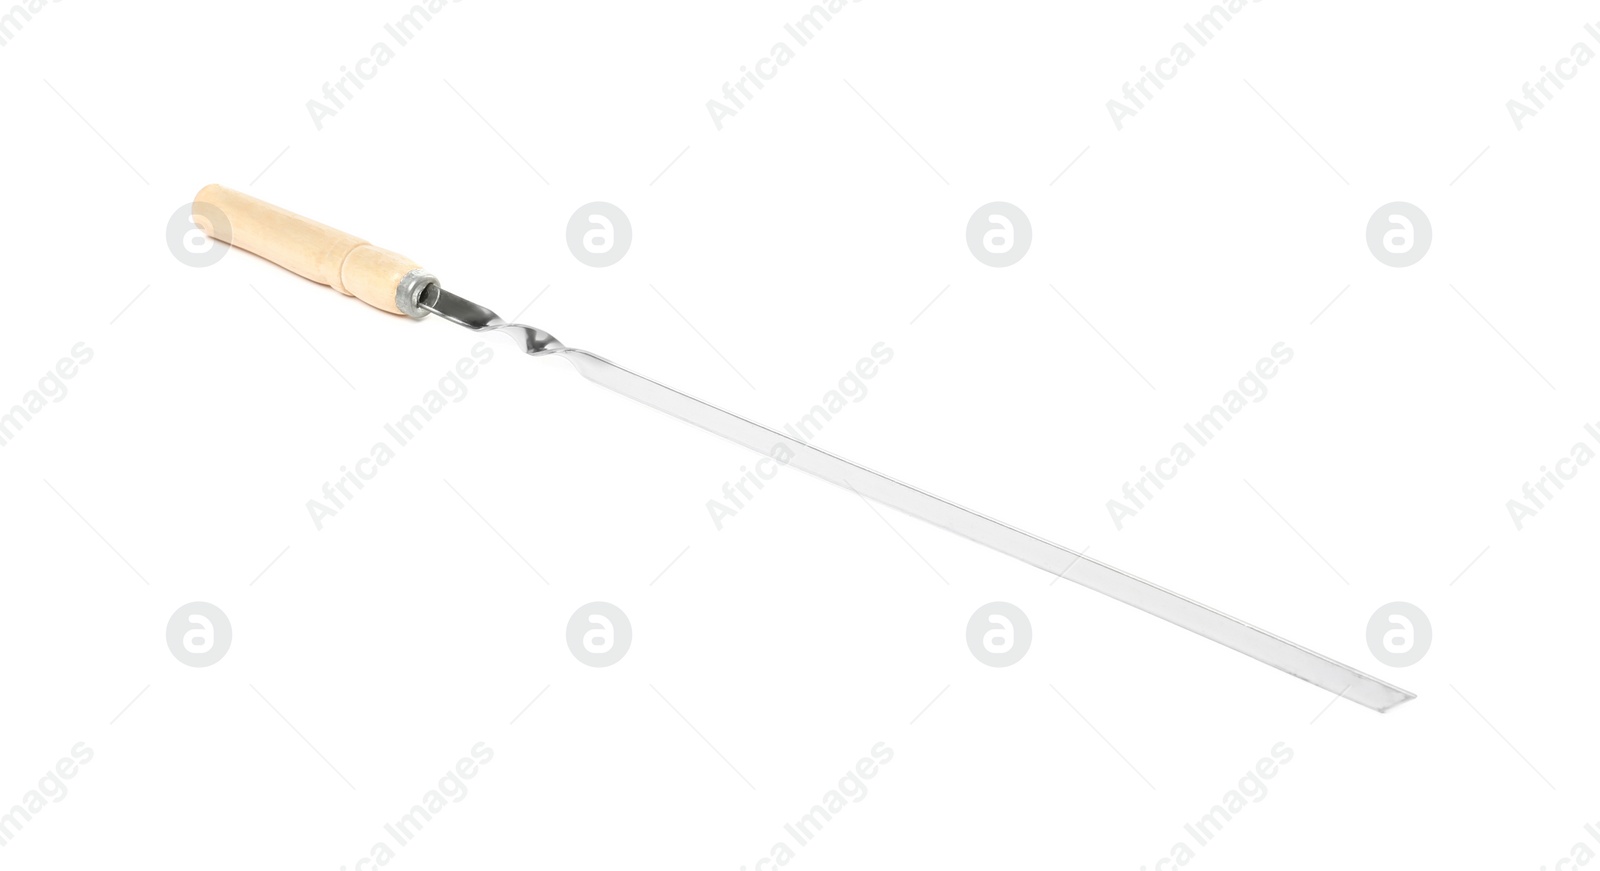 Photo of Metal skewer with wooden handle isolated on white